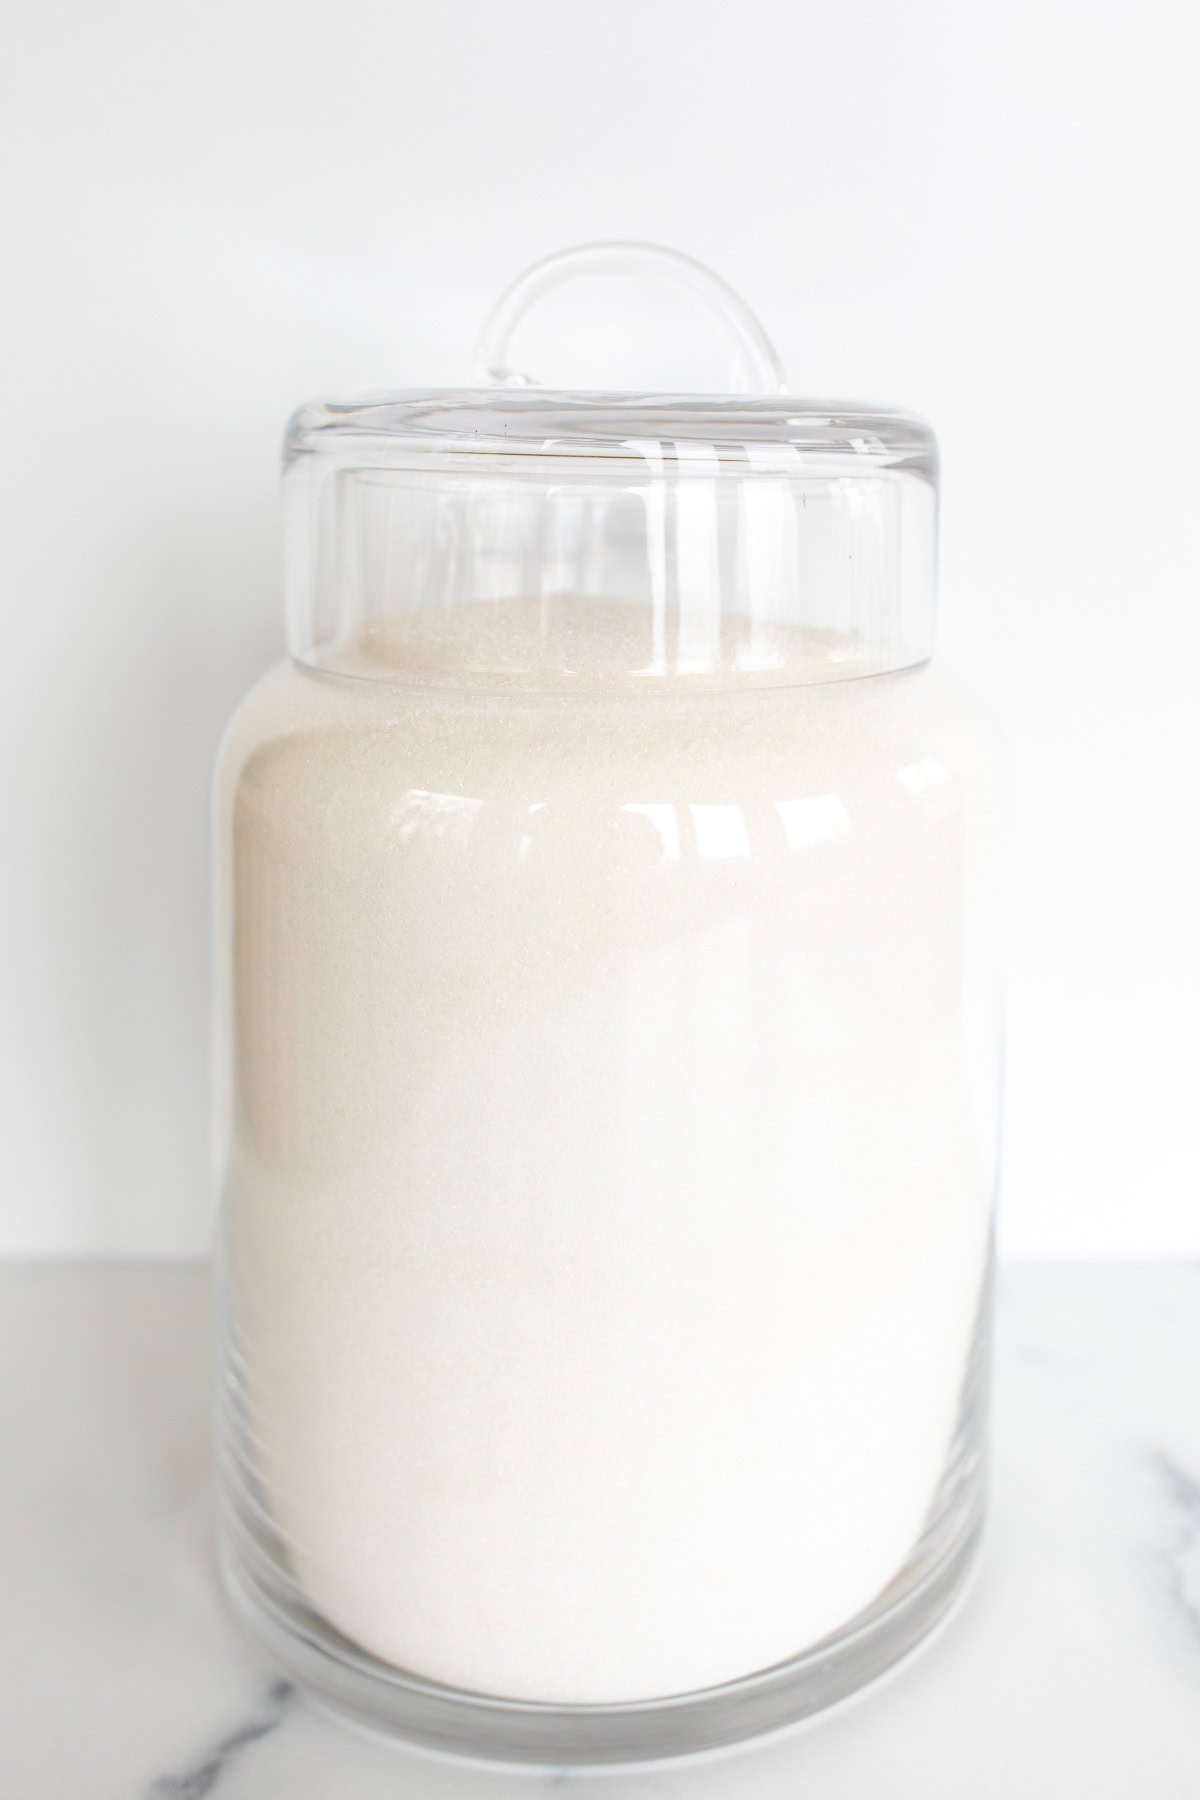 A clear glass jar filled with white sugar, sealed with a lid, sitting on a white marble surface, ideal for baking substitutions.